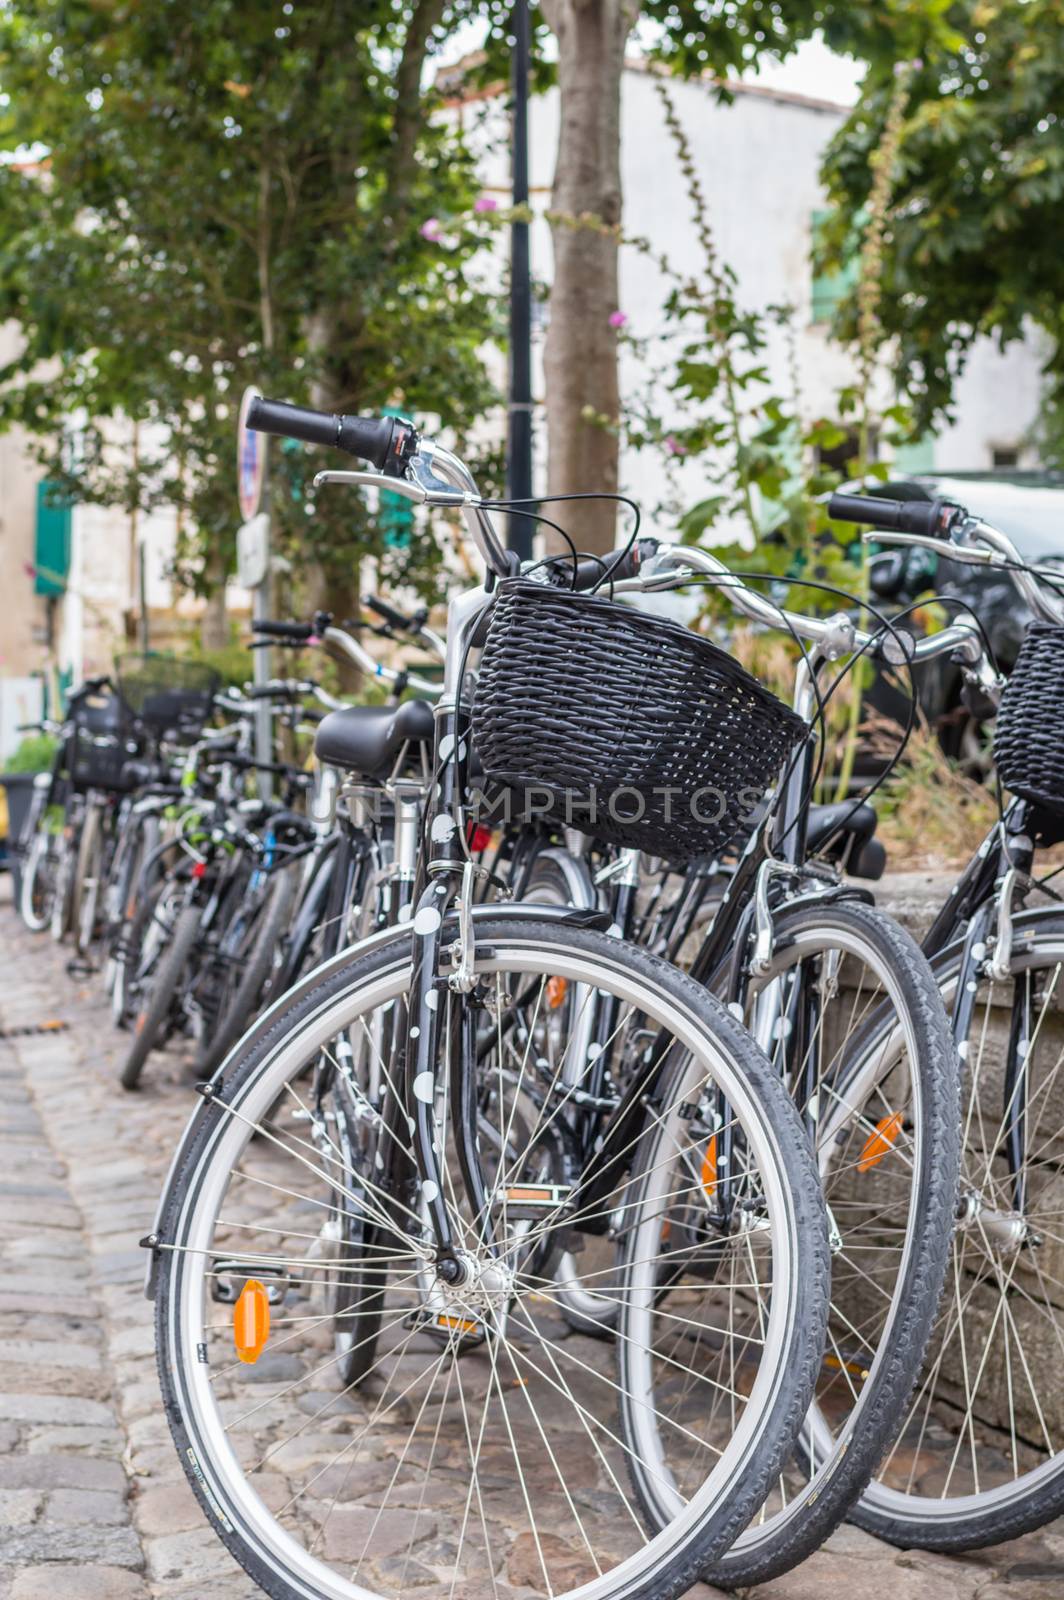 City bicycle with basket in front parked in a paved street